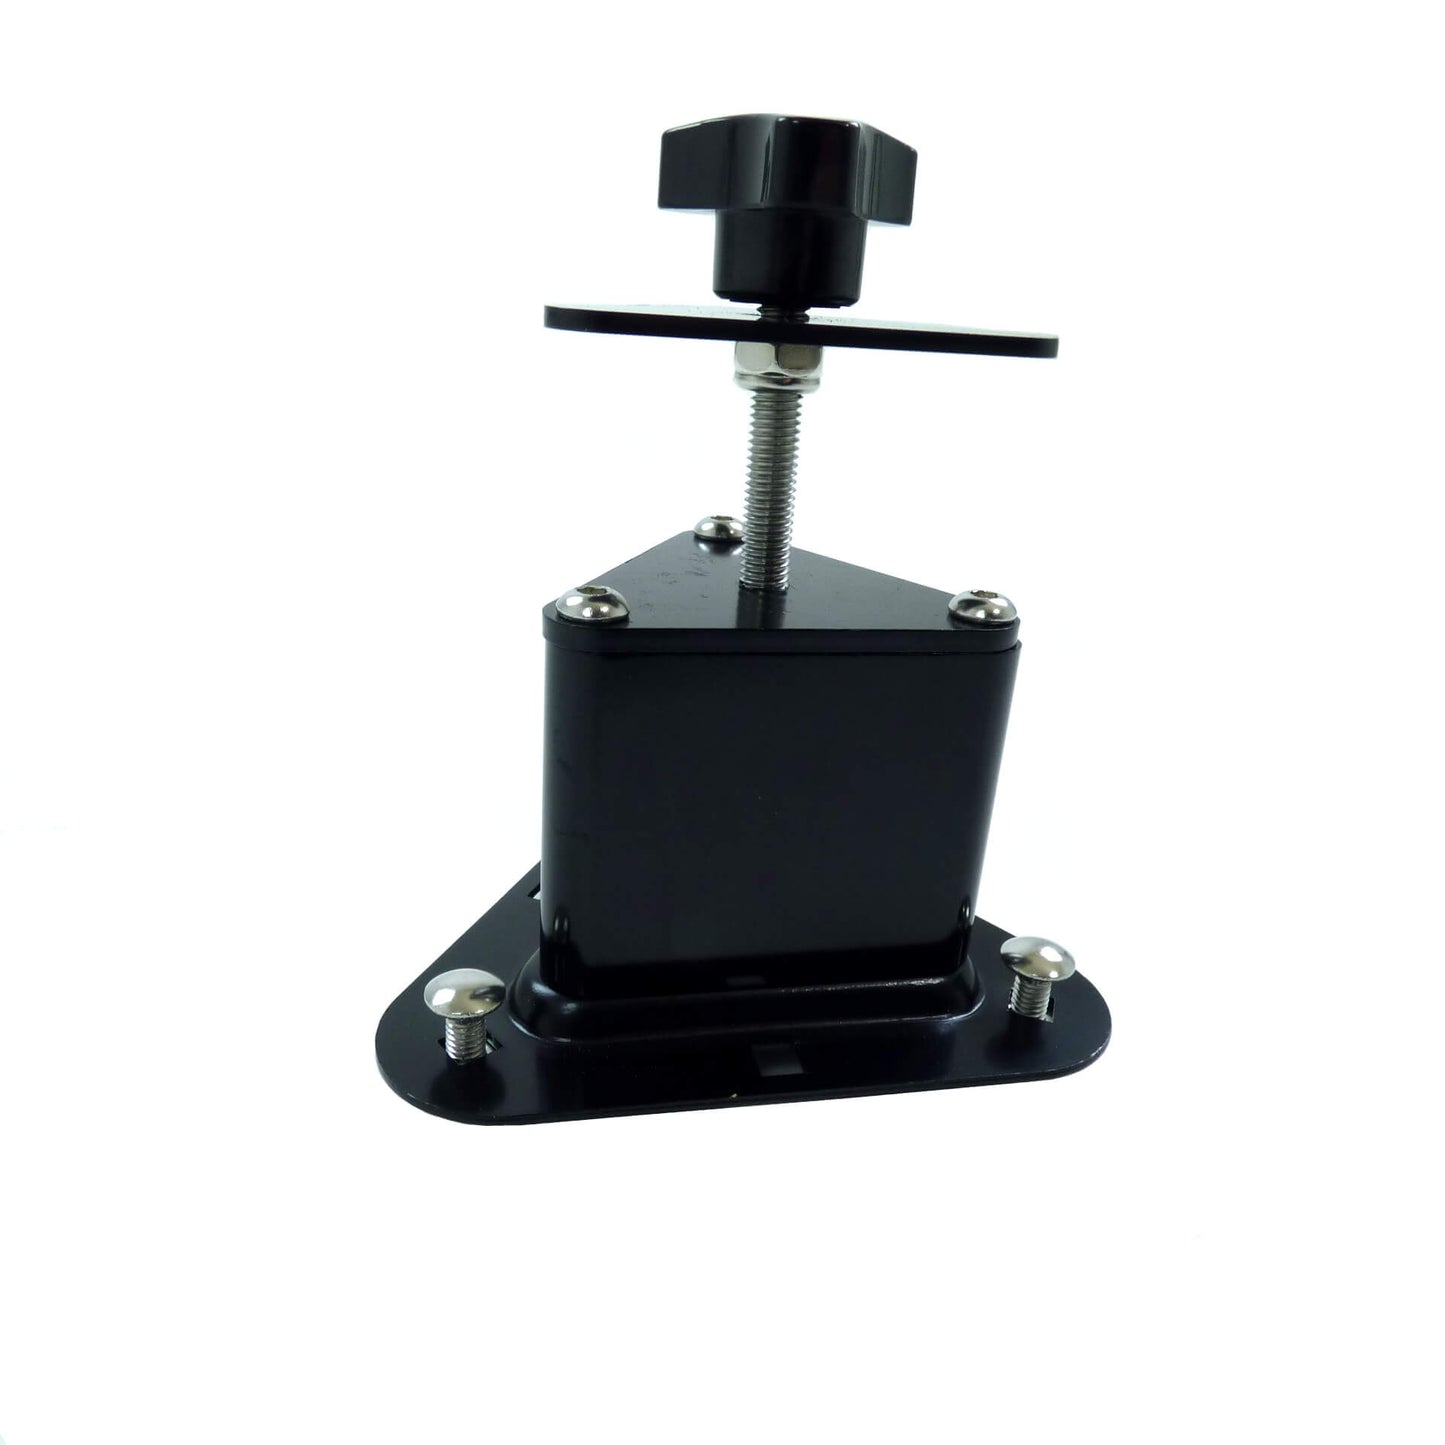 Mounting Clamp Bracket for High Capacity Jerry Cans -  - sold by Direct4x4